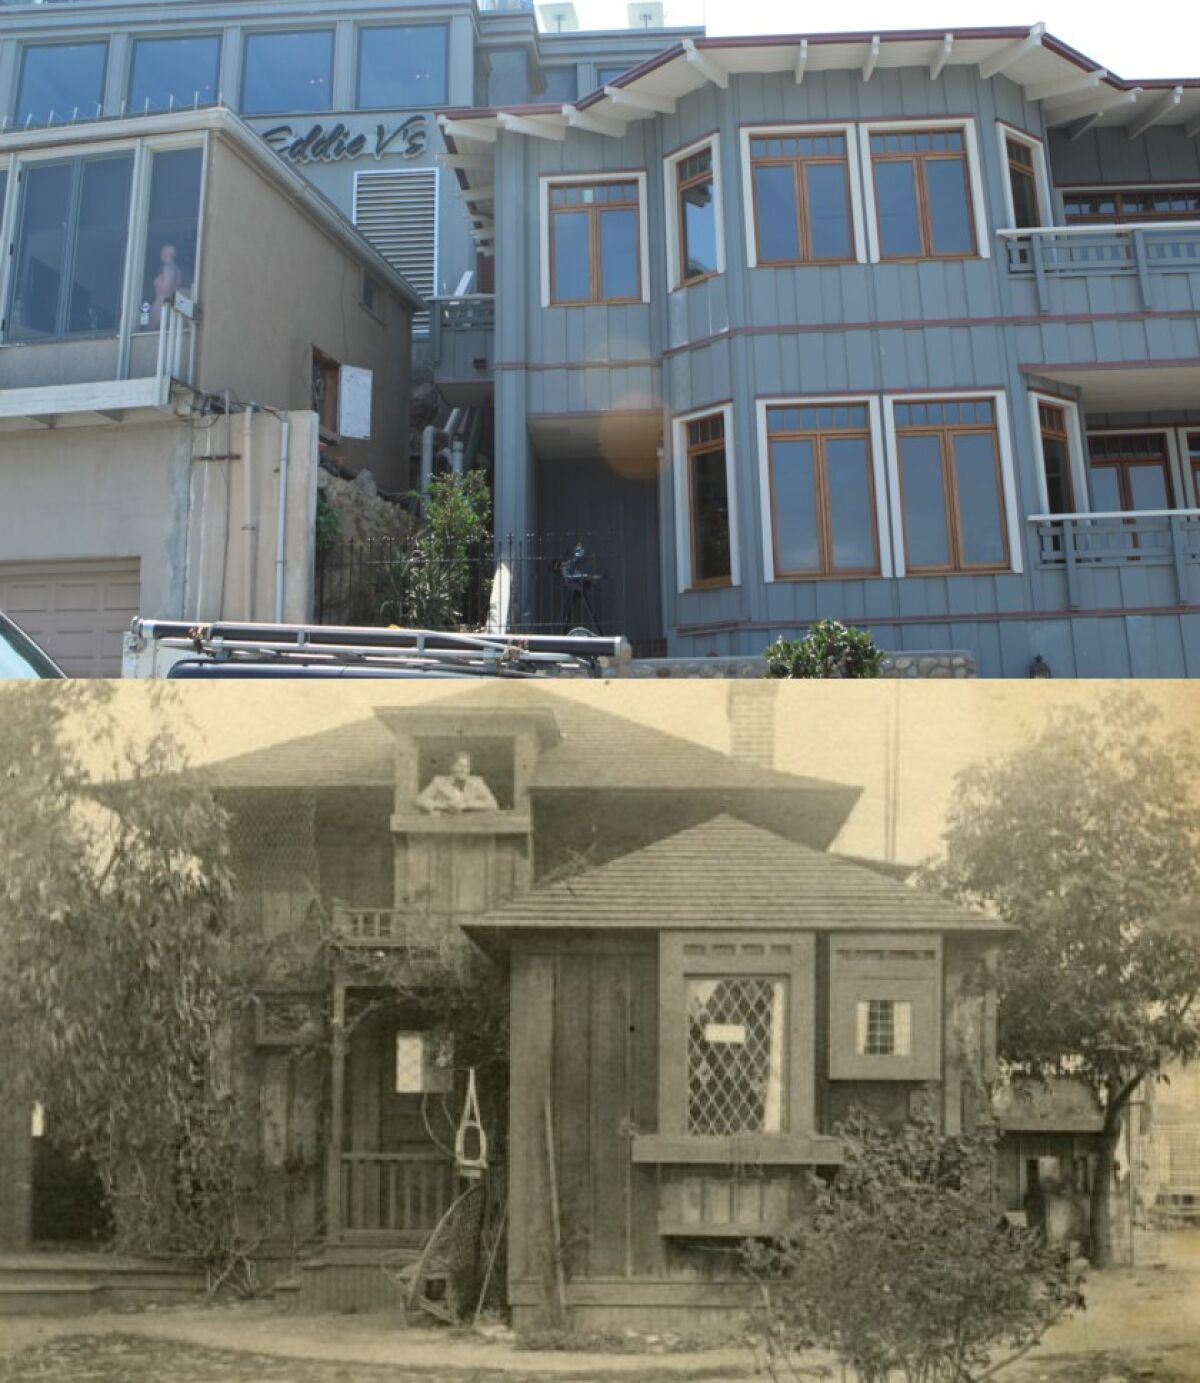 NOW (top): Eddie V’s and La Jolla Bay Homes share the former Green Dragon site. THEN (bottom): One of the Green Dragon cottages is pictured circa 1900.